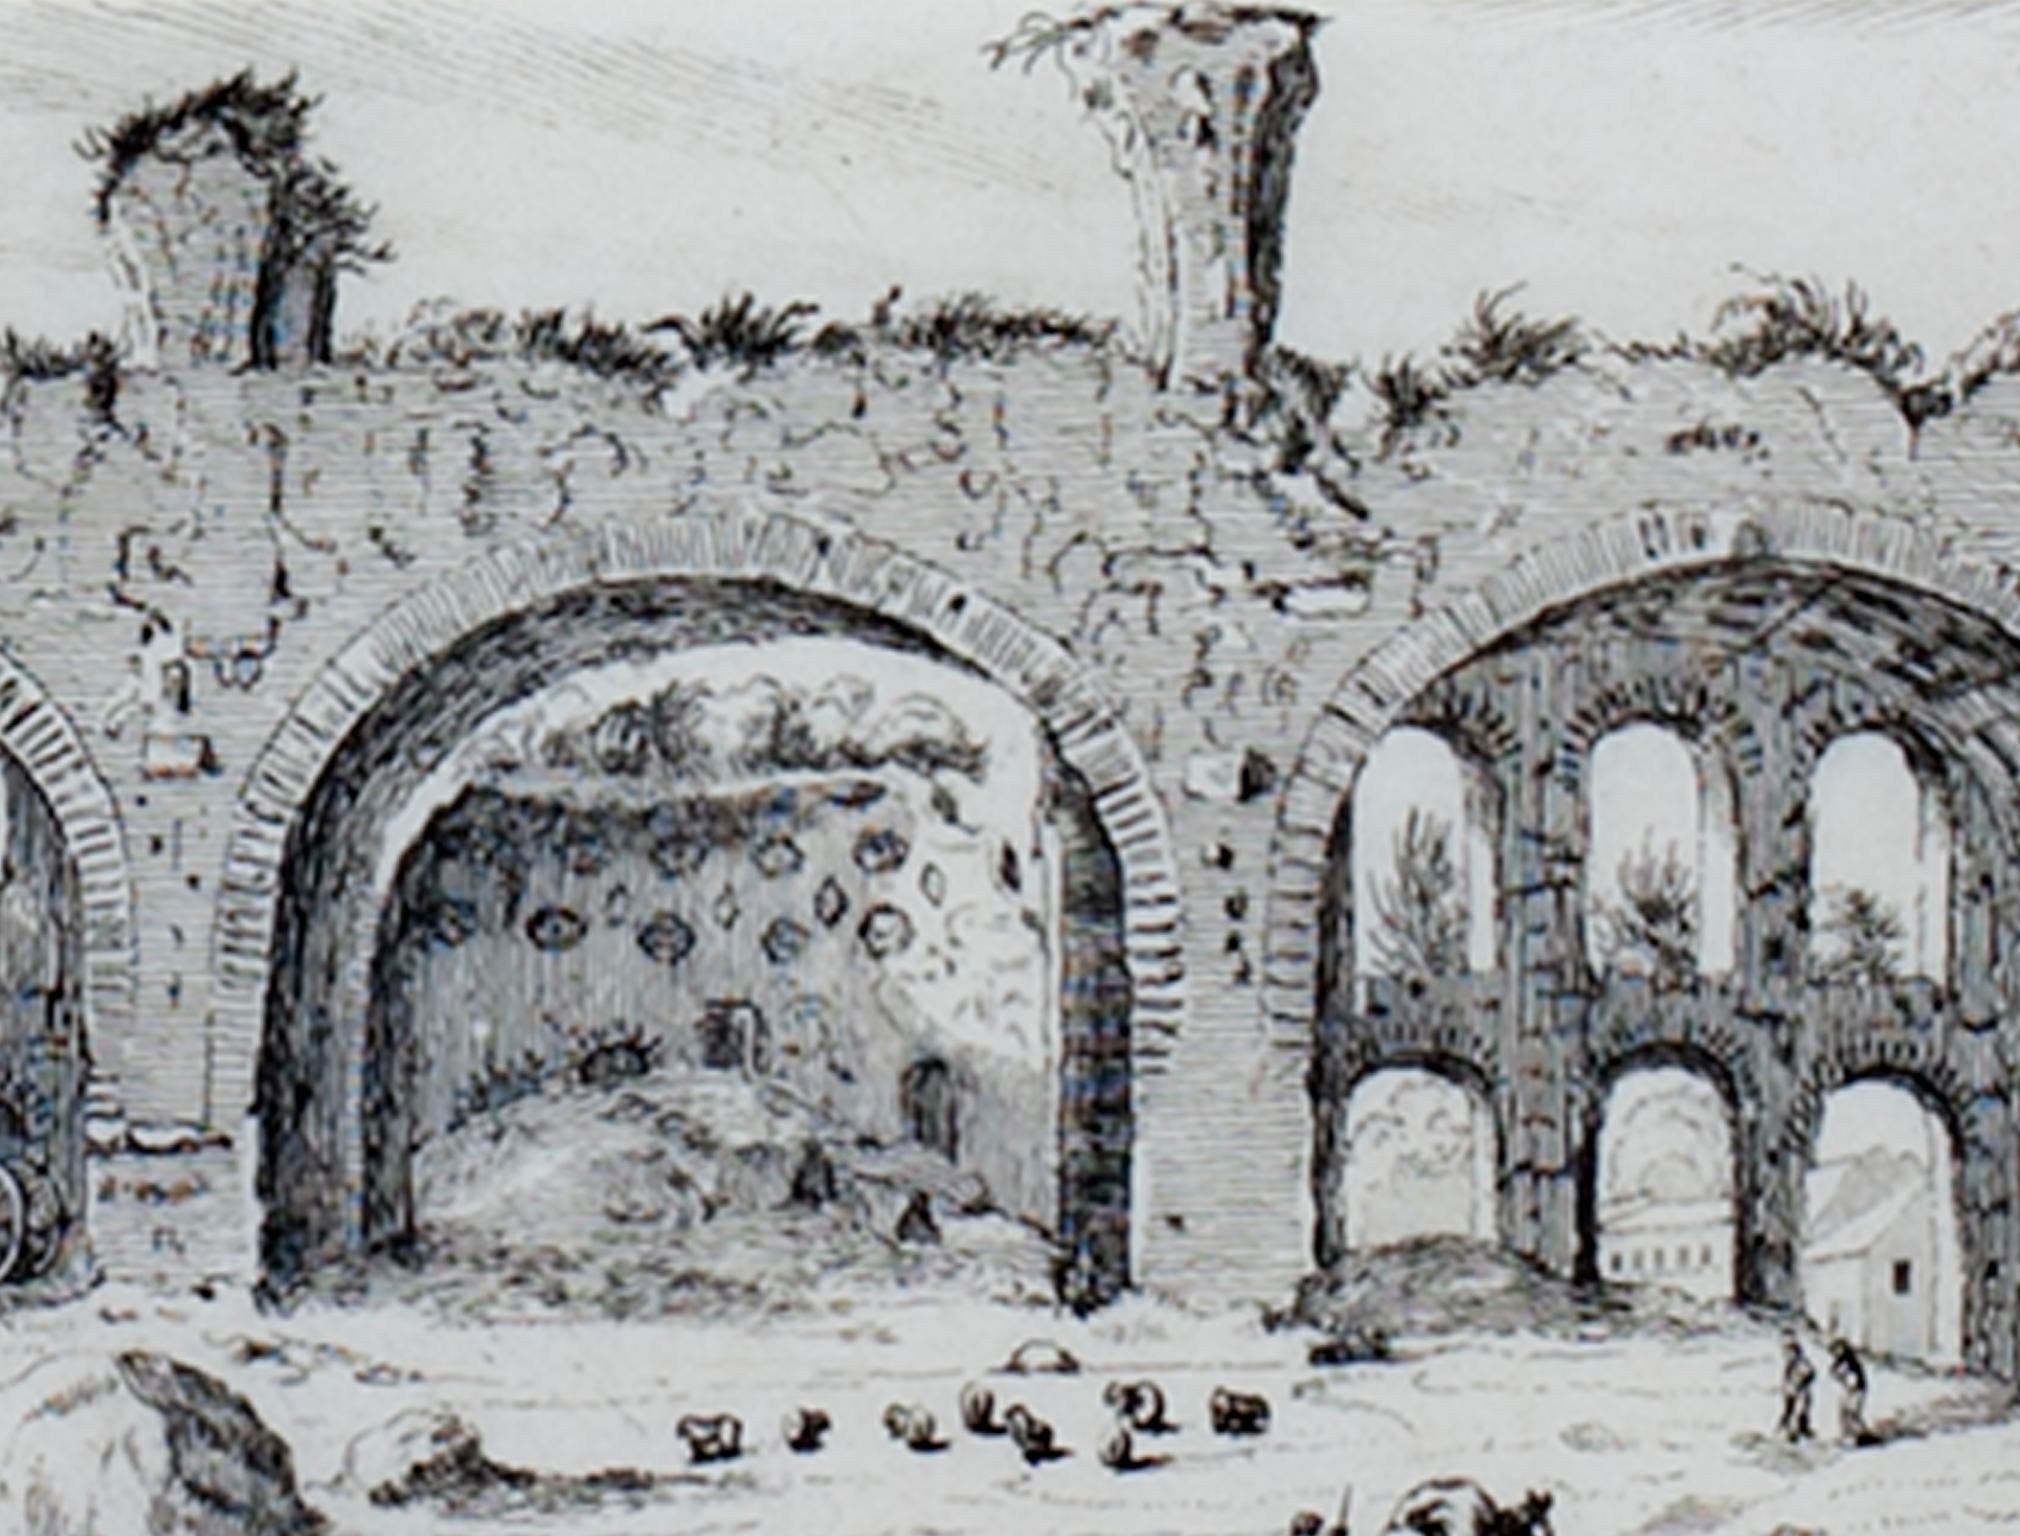 17th century engraving black and white landscape ancient building scene - Old Masters Print by Israel Silvestre